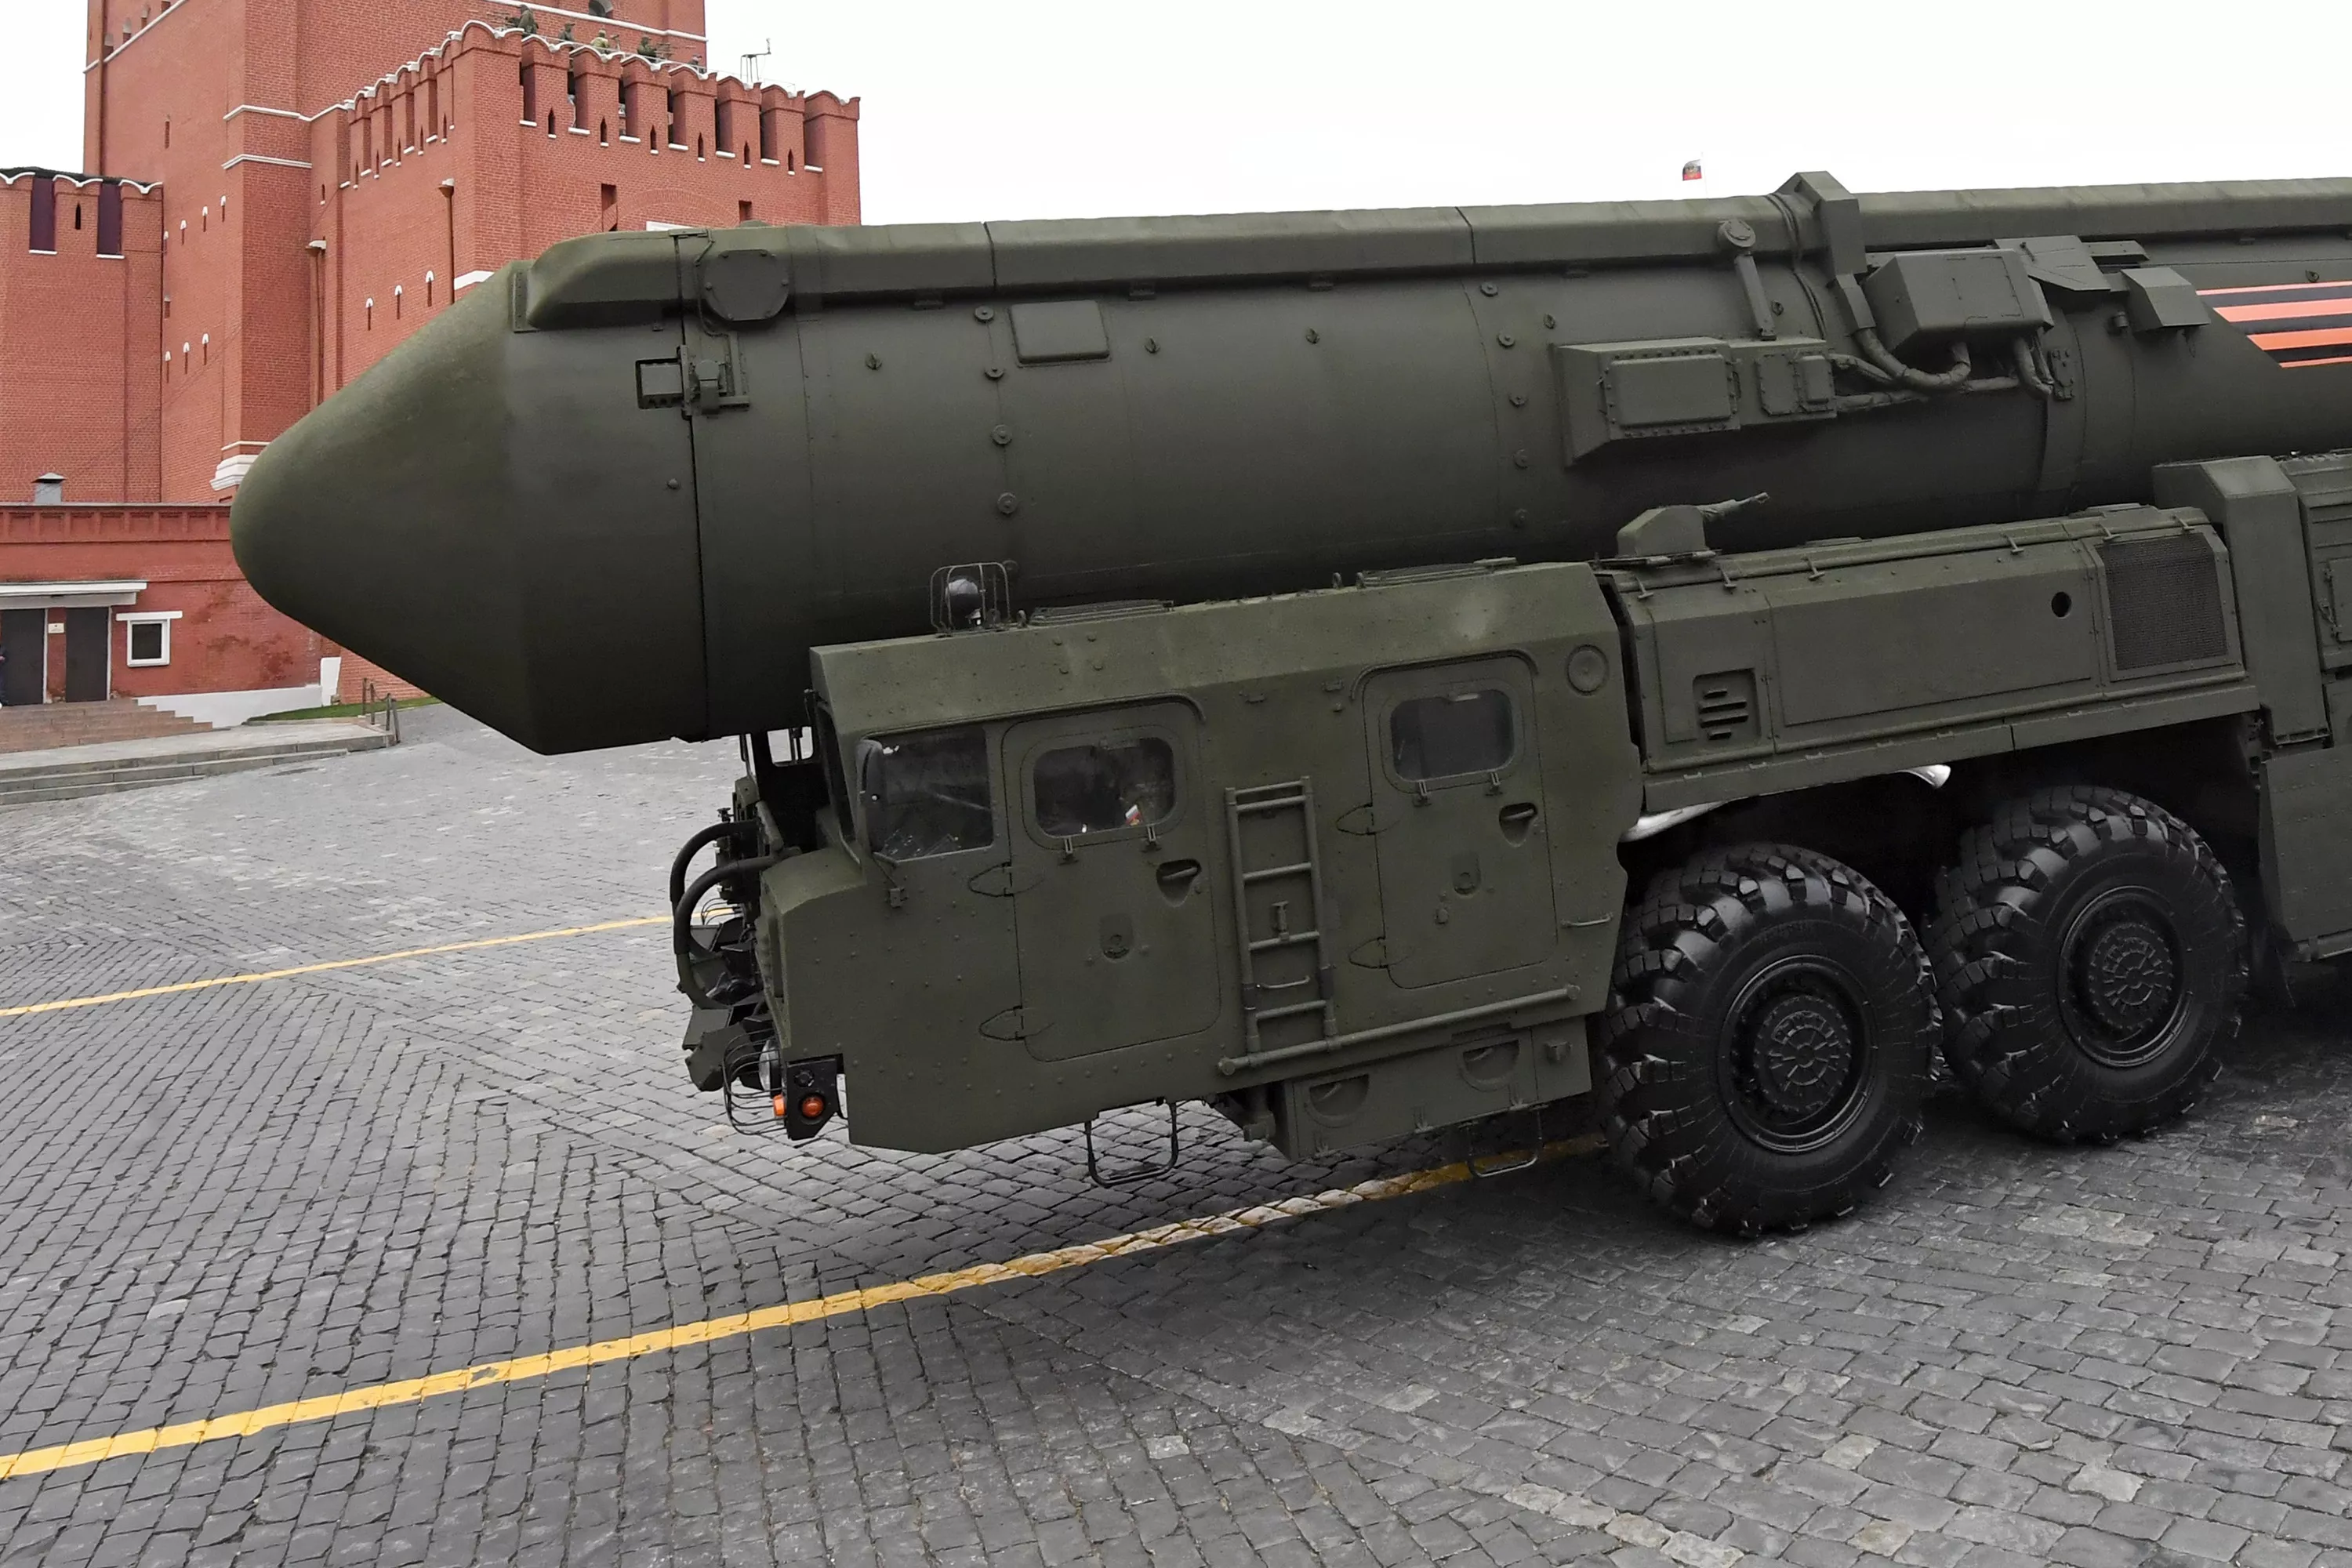 The Russians have launched the SS-27 Mod 2 intercontinental ballistic missile with a range of 12,000 kilometres, which can carry a nuclear warhead with a yield of up to 500 kilotons-6